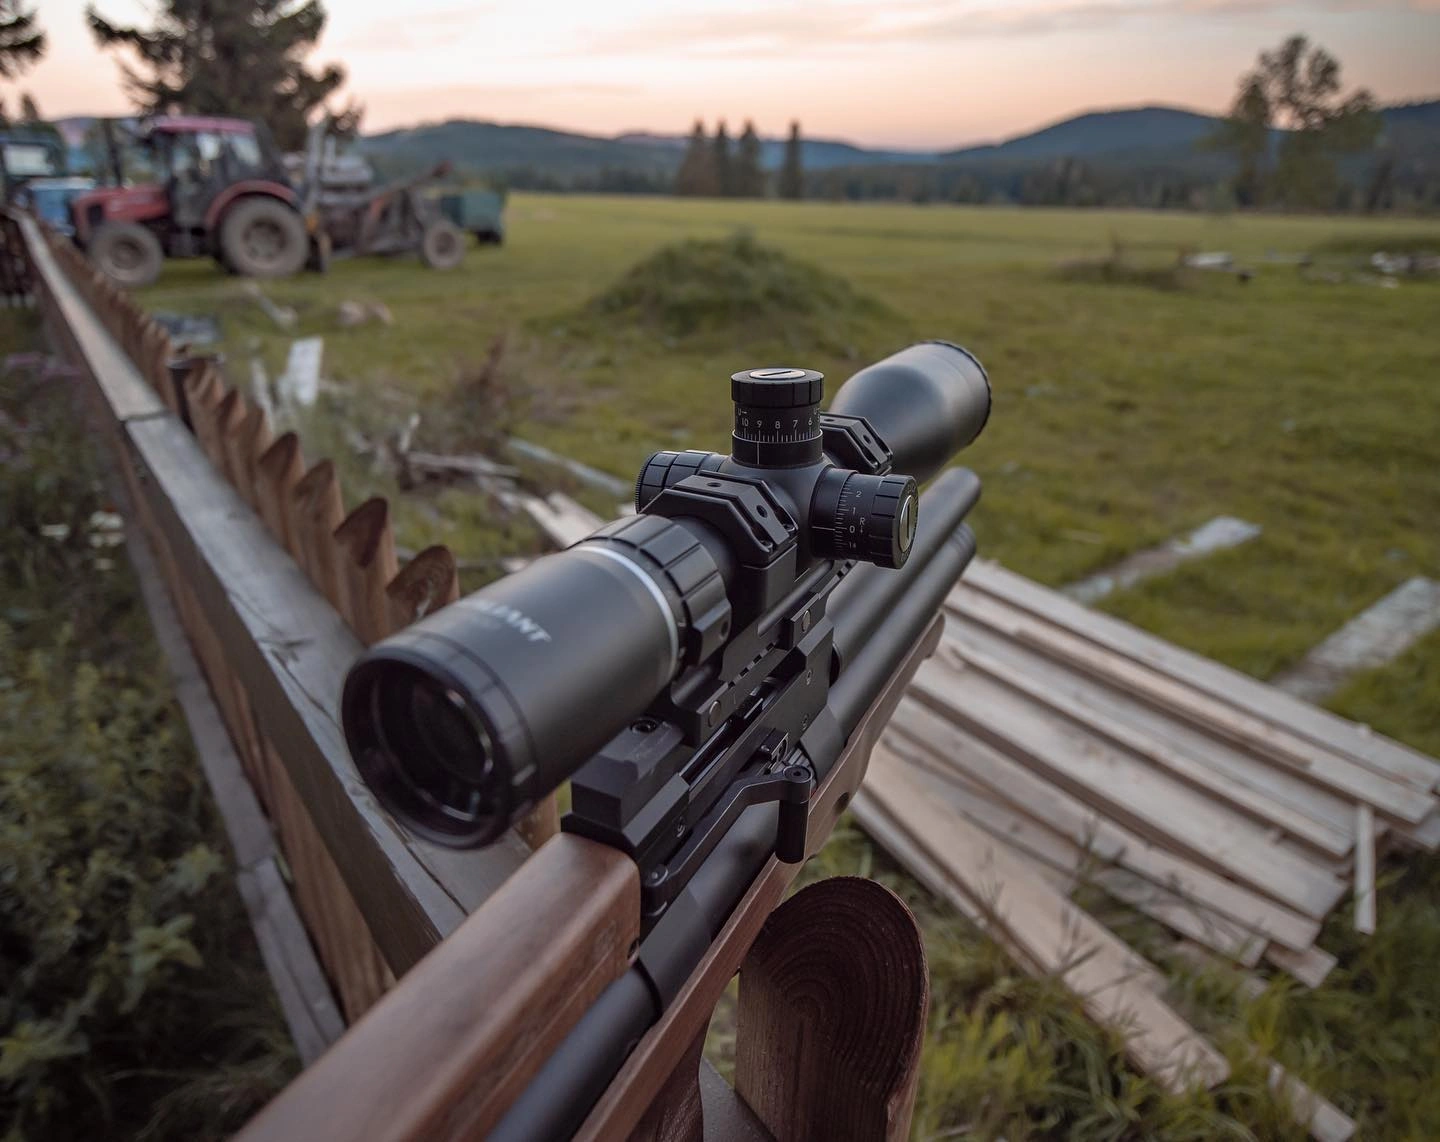 Keep safe and stay in nature as much as you can 🙏 #valiantoptics #valiantzephyr #kalibrgun #kalibrguncricket #kalibrguncricket22 #rifles #riflescope #pewpew #hunting #nature